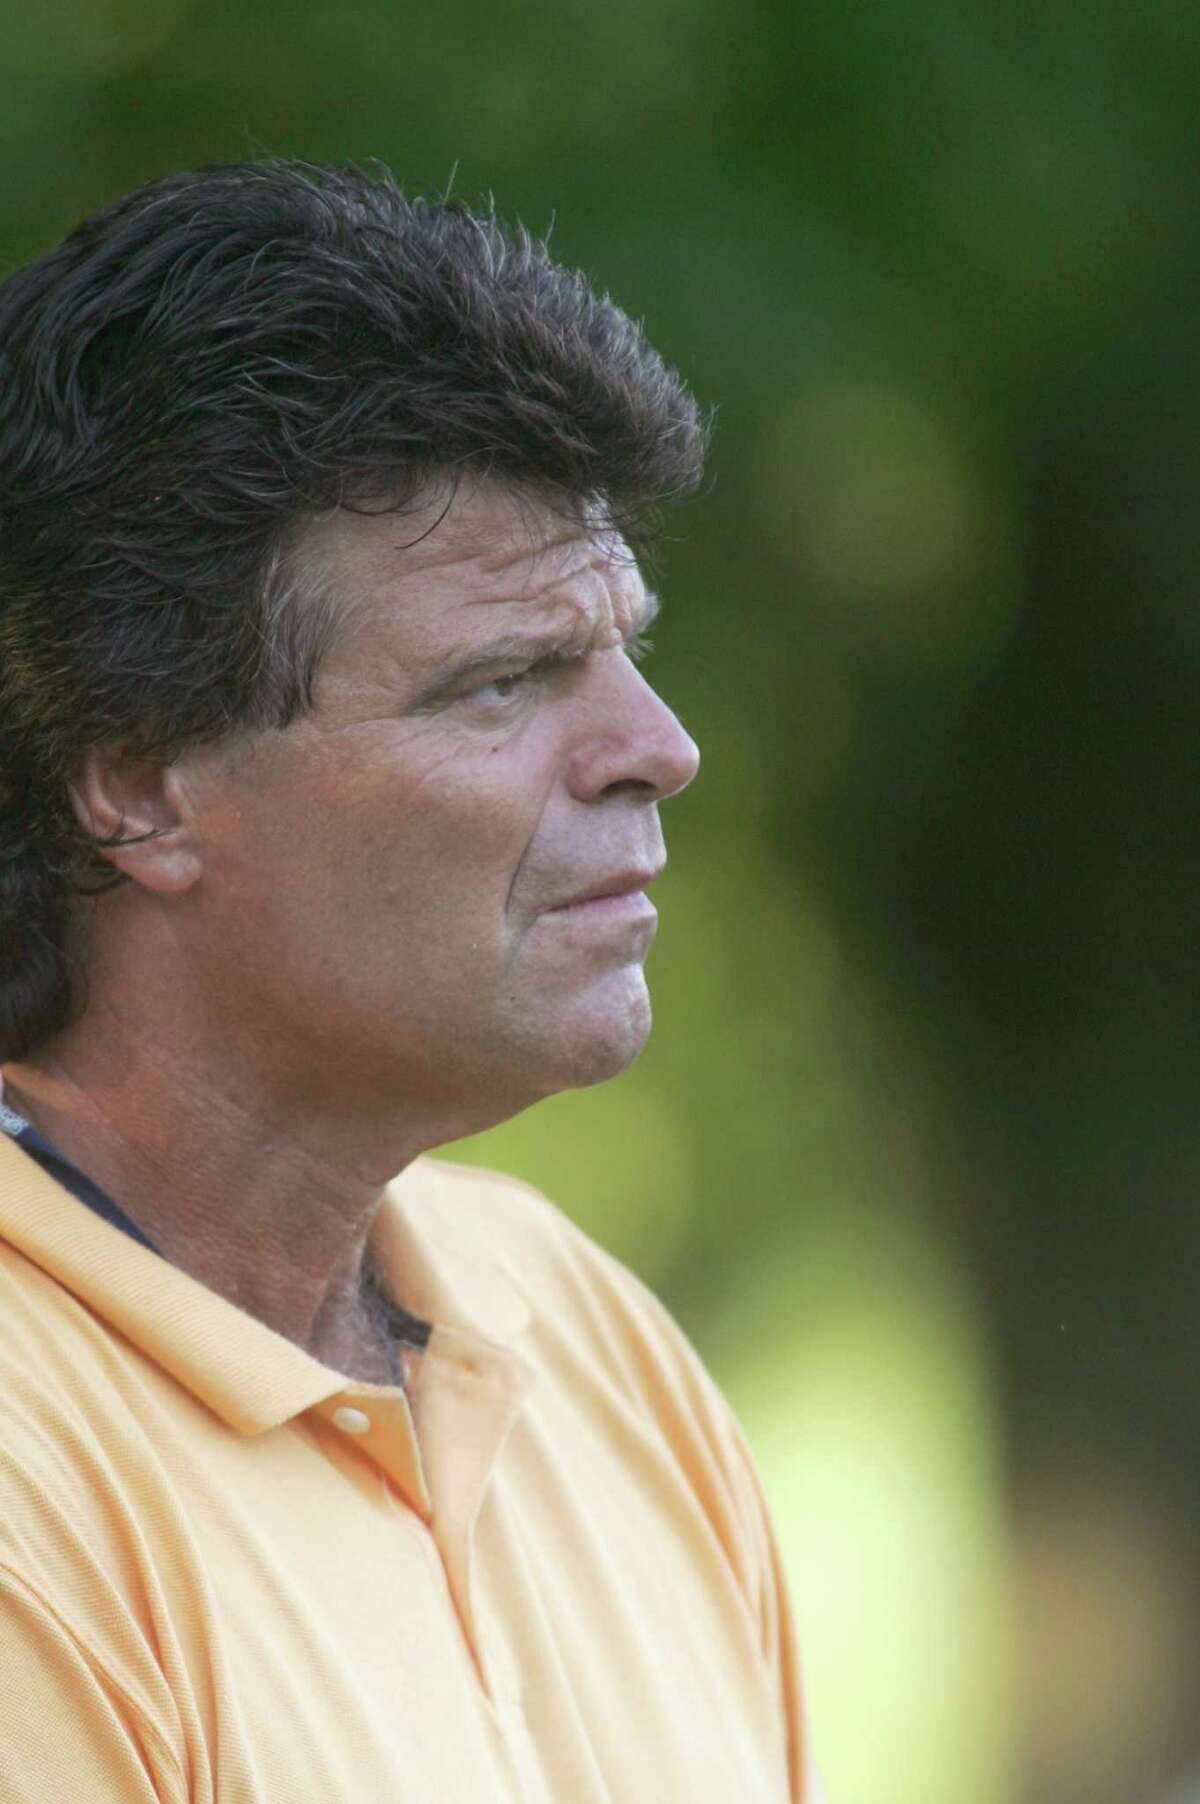 HEMPSTEAD, NY - JULY 30: Former New York Jet player Mark Gastineau during New York Jets Training Camp on July 30, 2006 at Hofstra University in Hempstead, New York. (Photo by Mike Stobe/Getty Images)